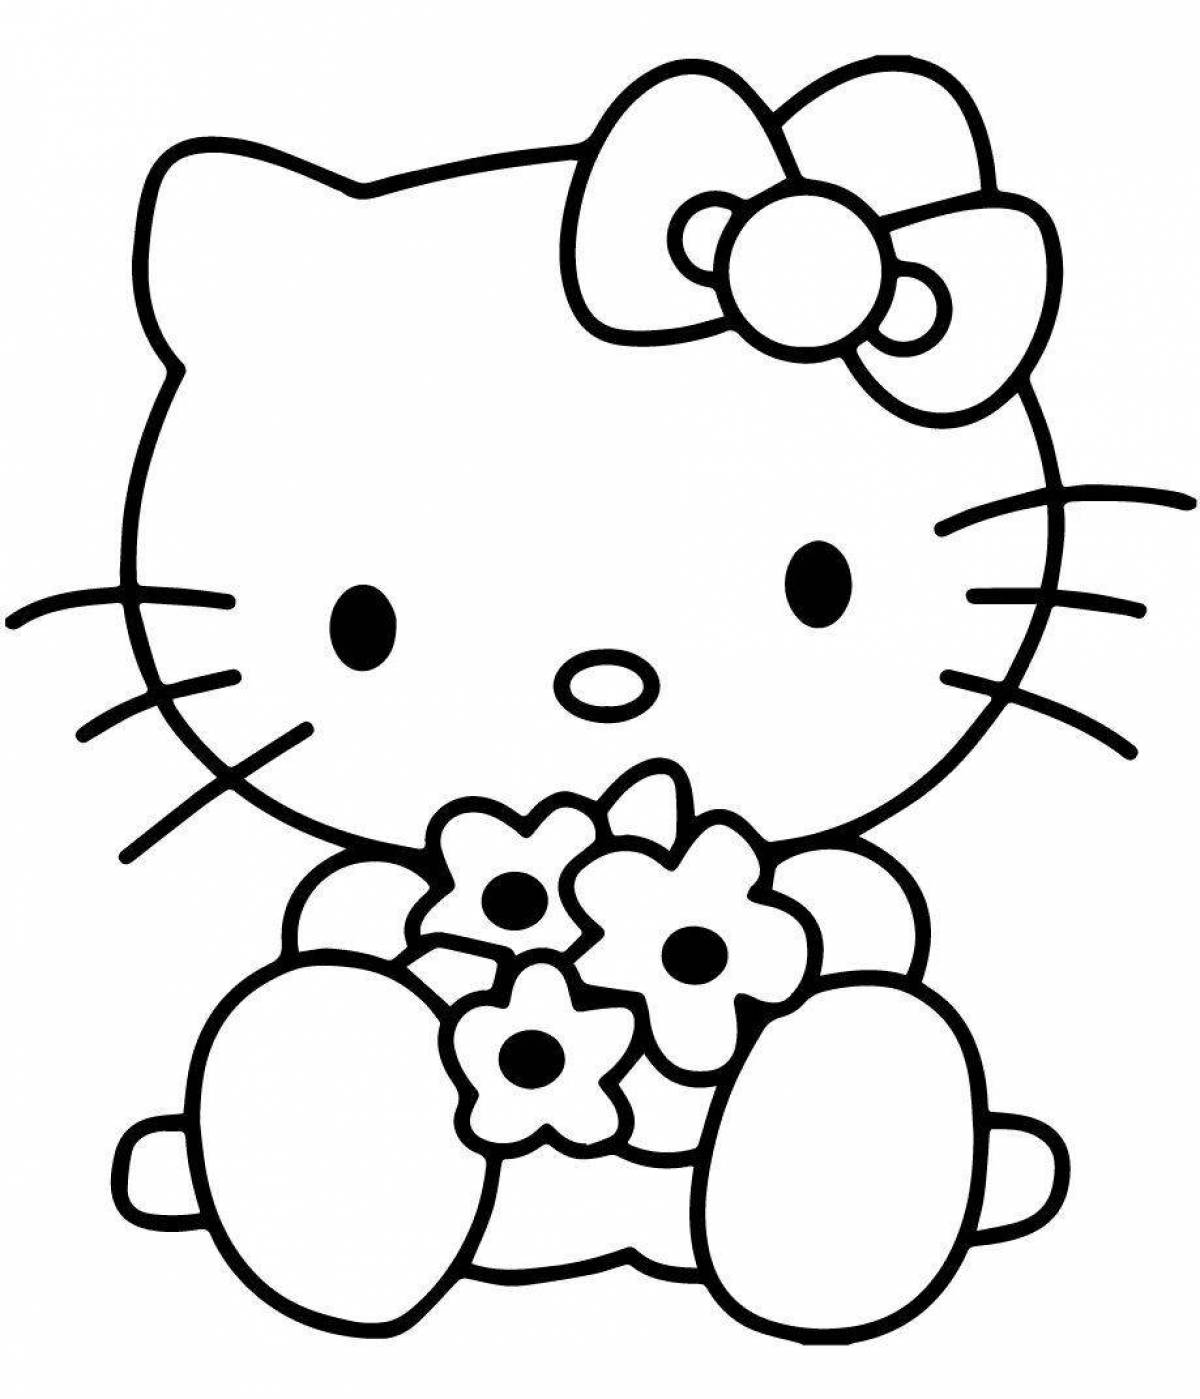 Kitty cat friendly coloring book